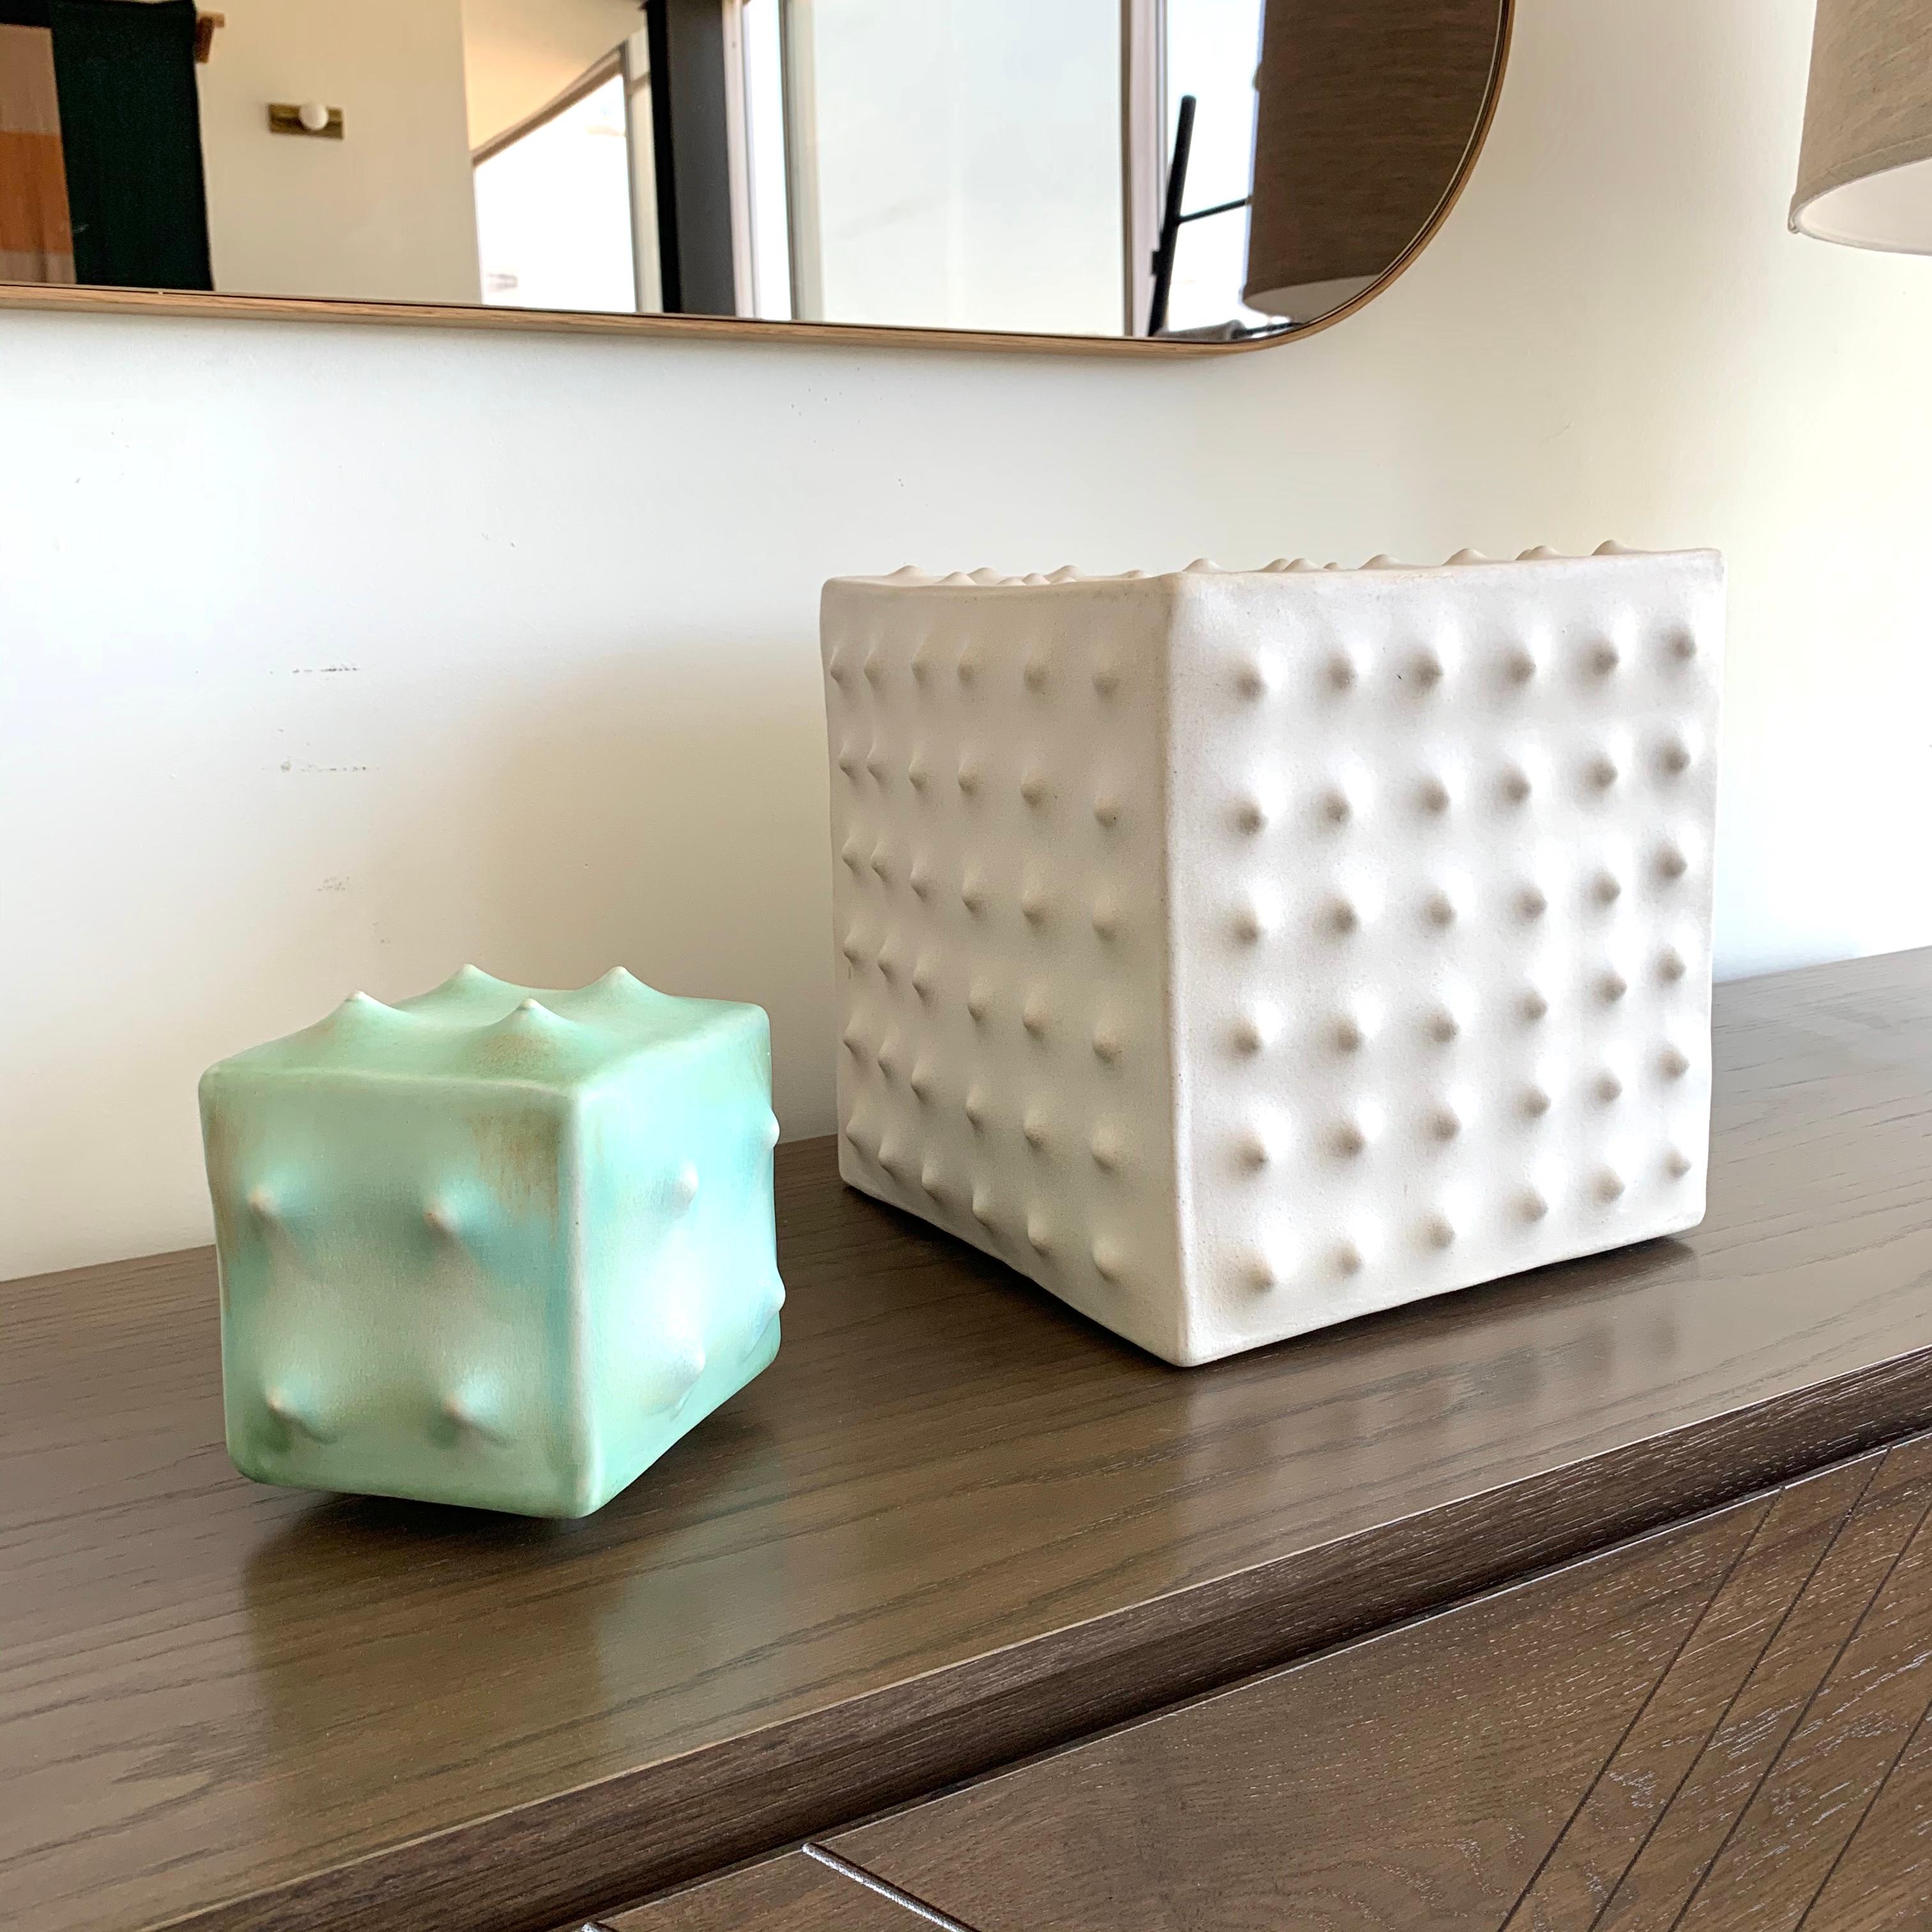 White ceramic cube sculpture by Luke Shalan, 2019

Luke Shalan is a ceramic artist working in Joshua Tree, CA. While examining both traditional and unconventional forms of production, he emphasizes the importance of creative concept and process in